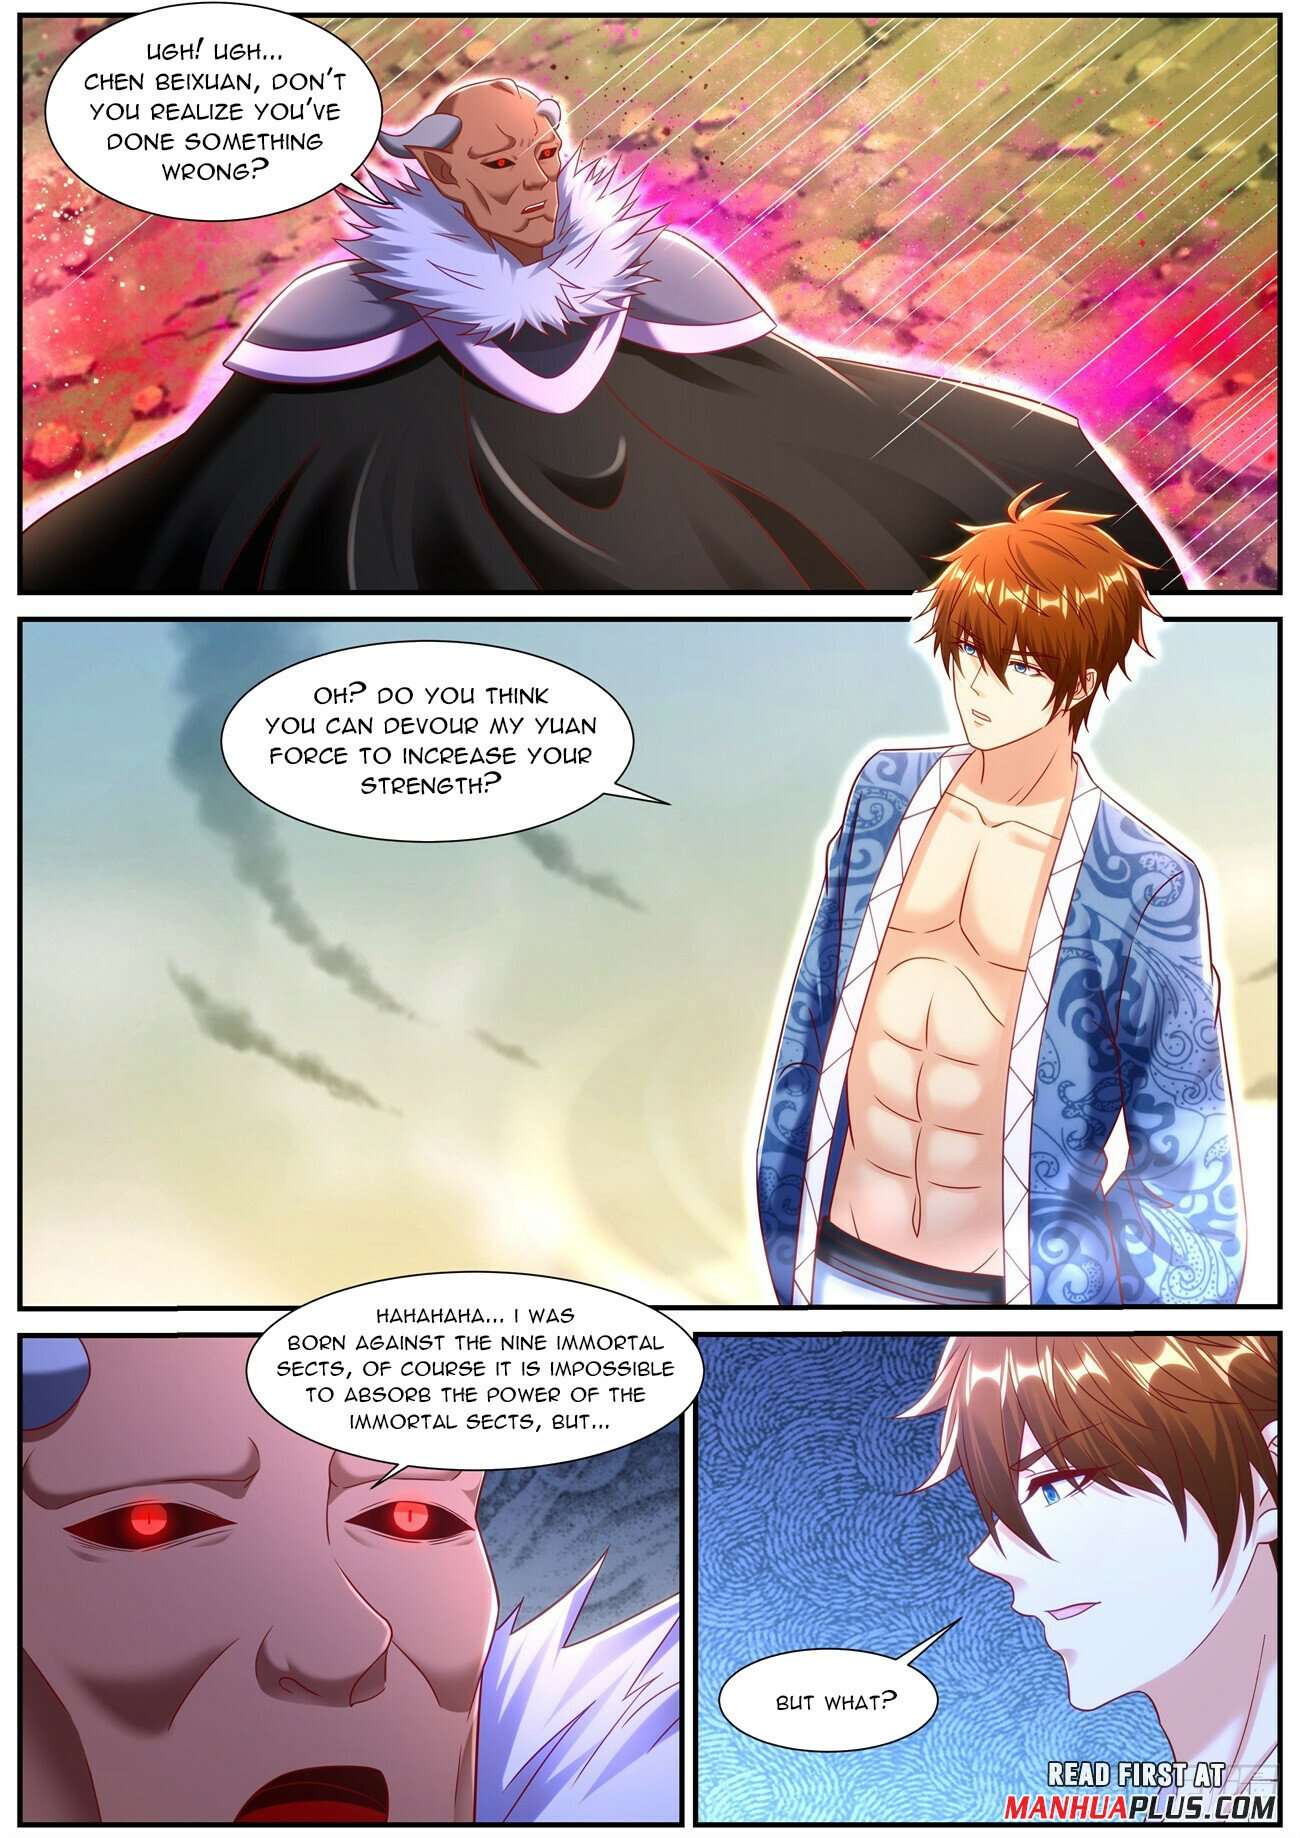 Rebirth of the Urban Immortal Cultivator, Chapter 401 - Rebirth of